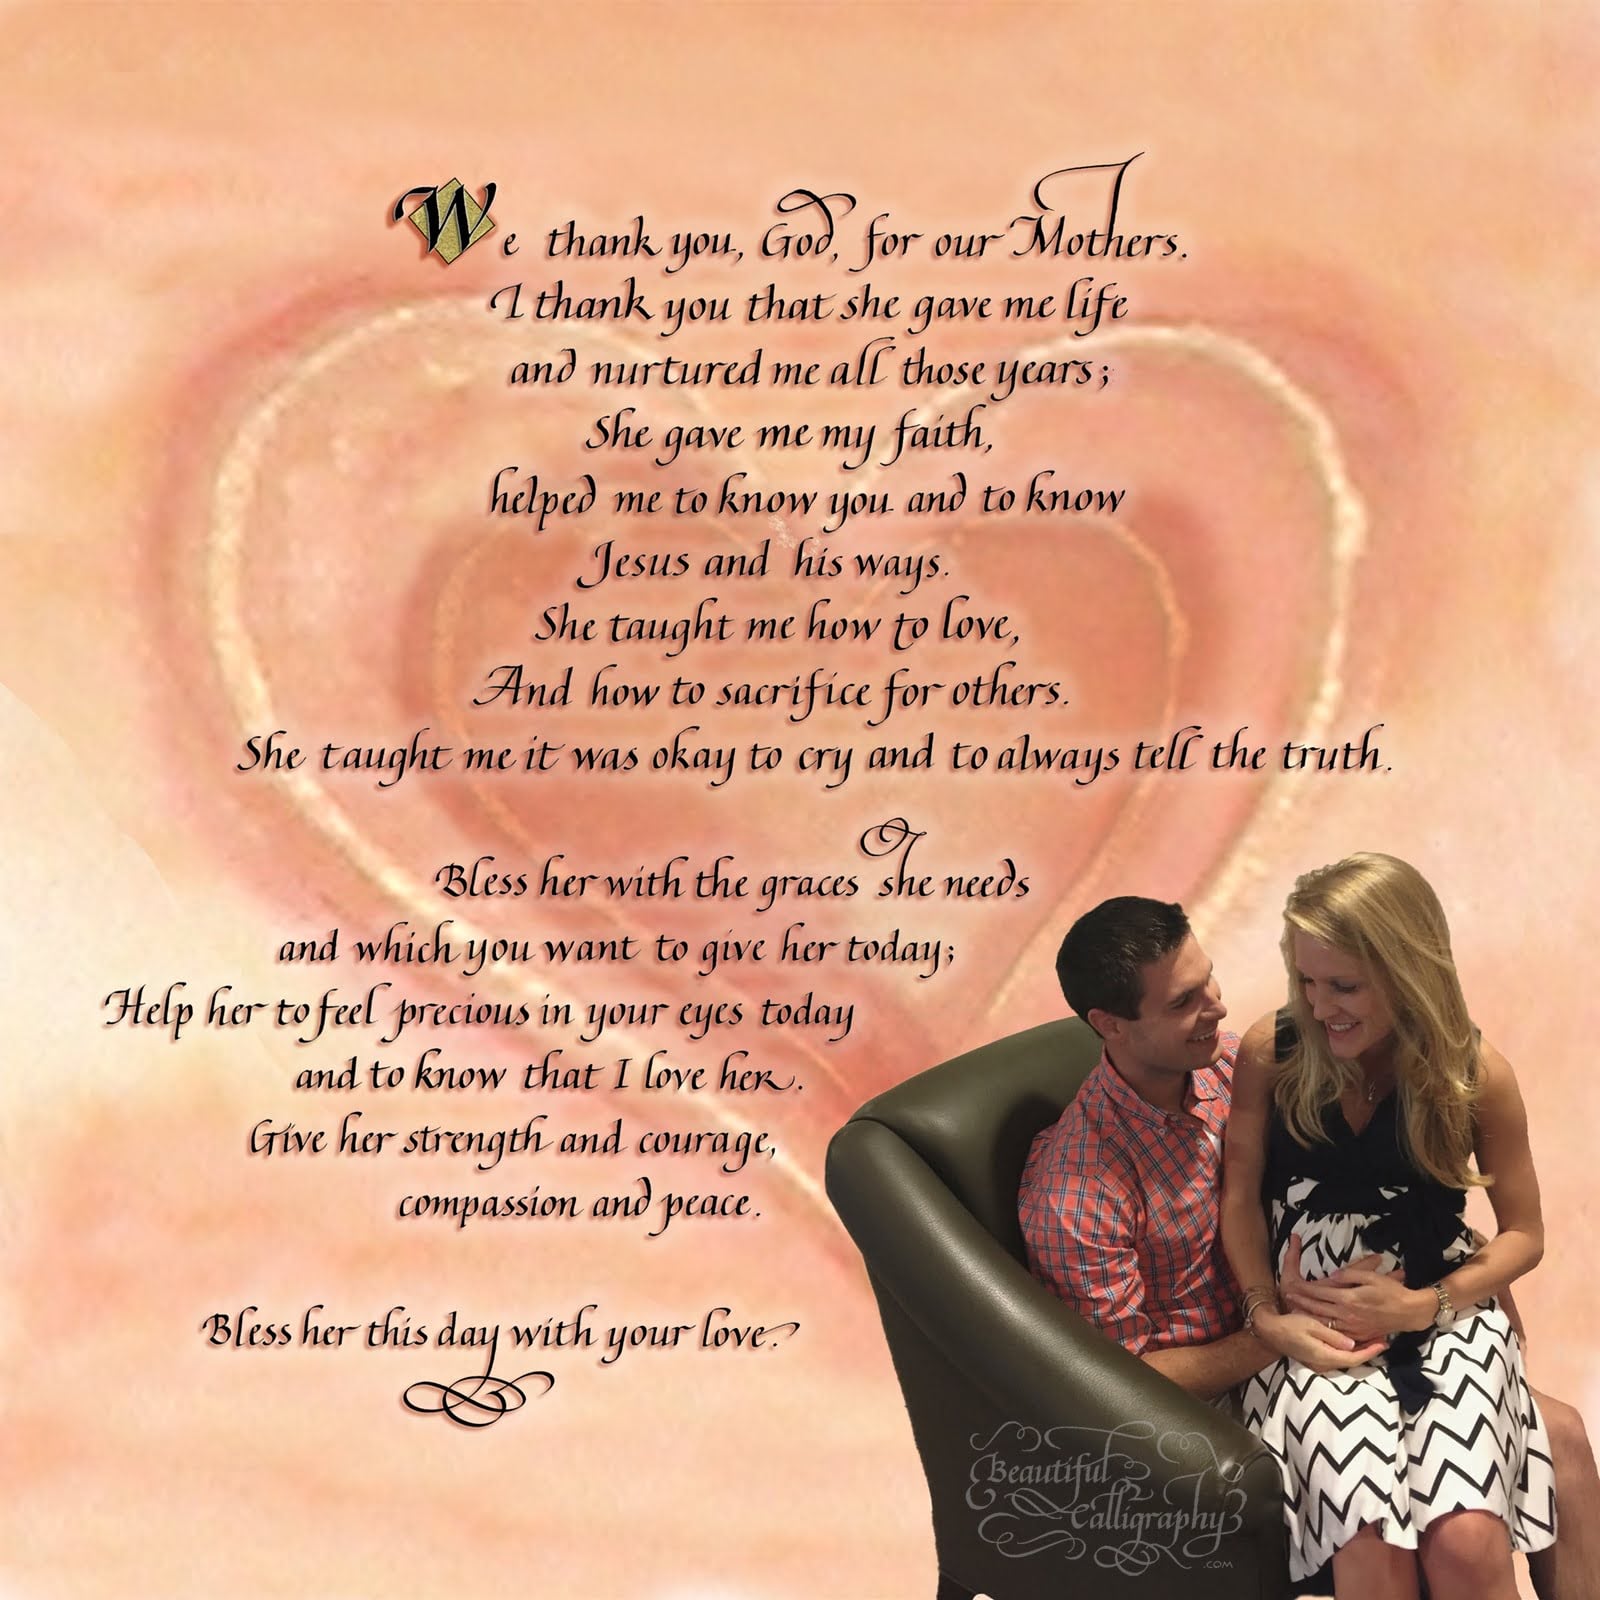 Mother's Day gift of pregnant new wife with her husband's dear God letter in calligraphy